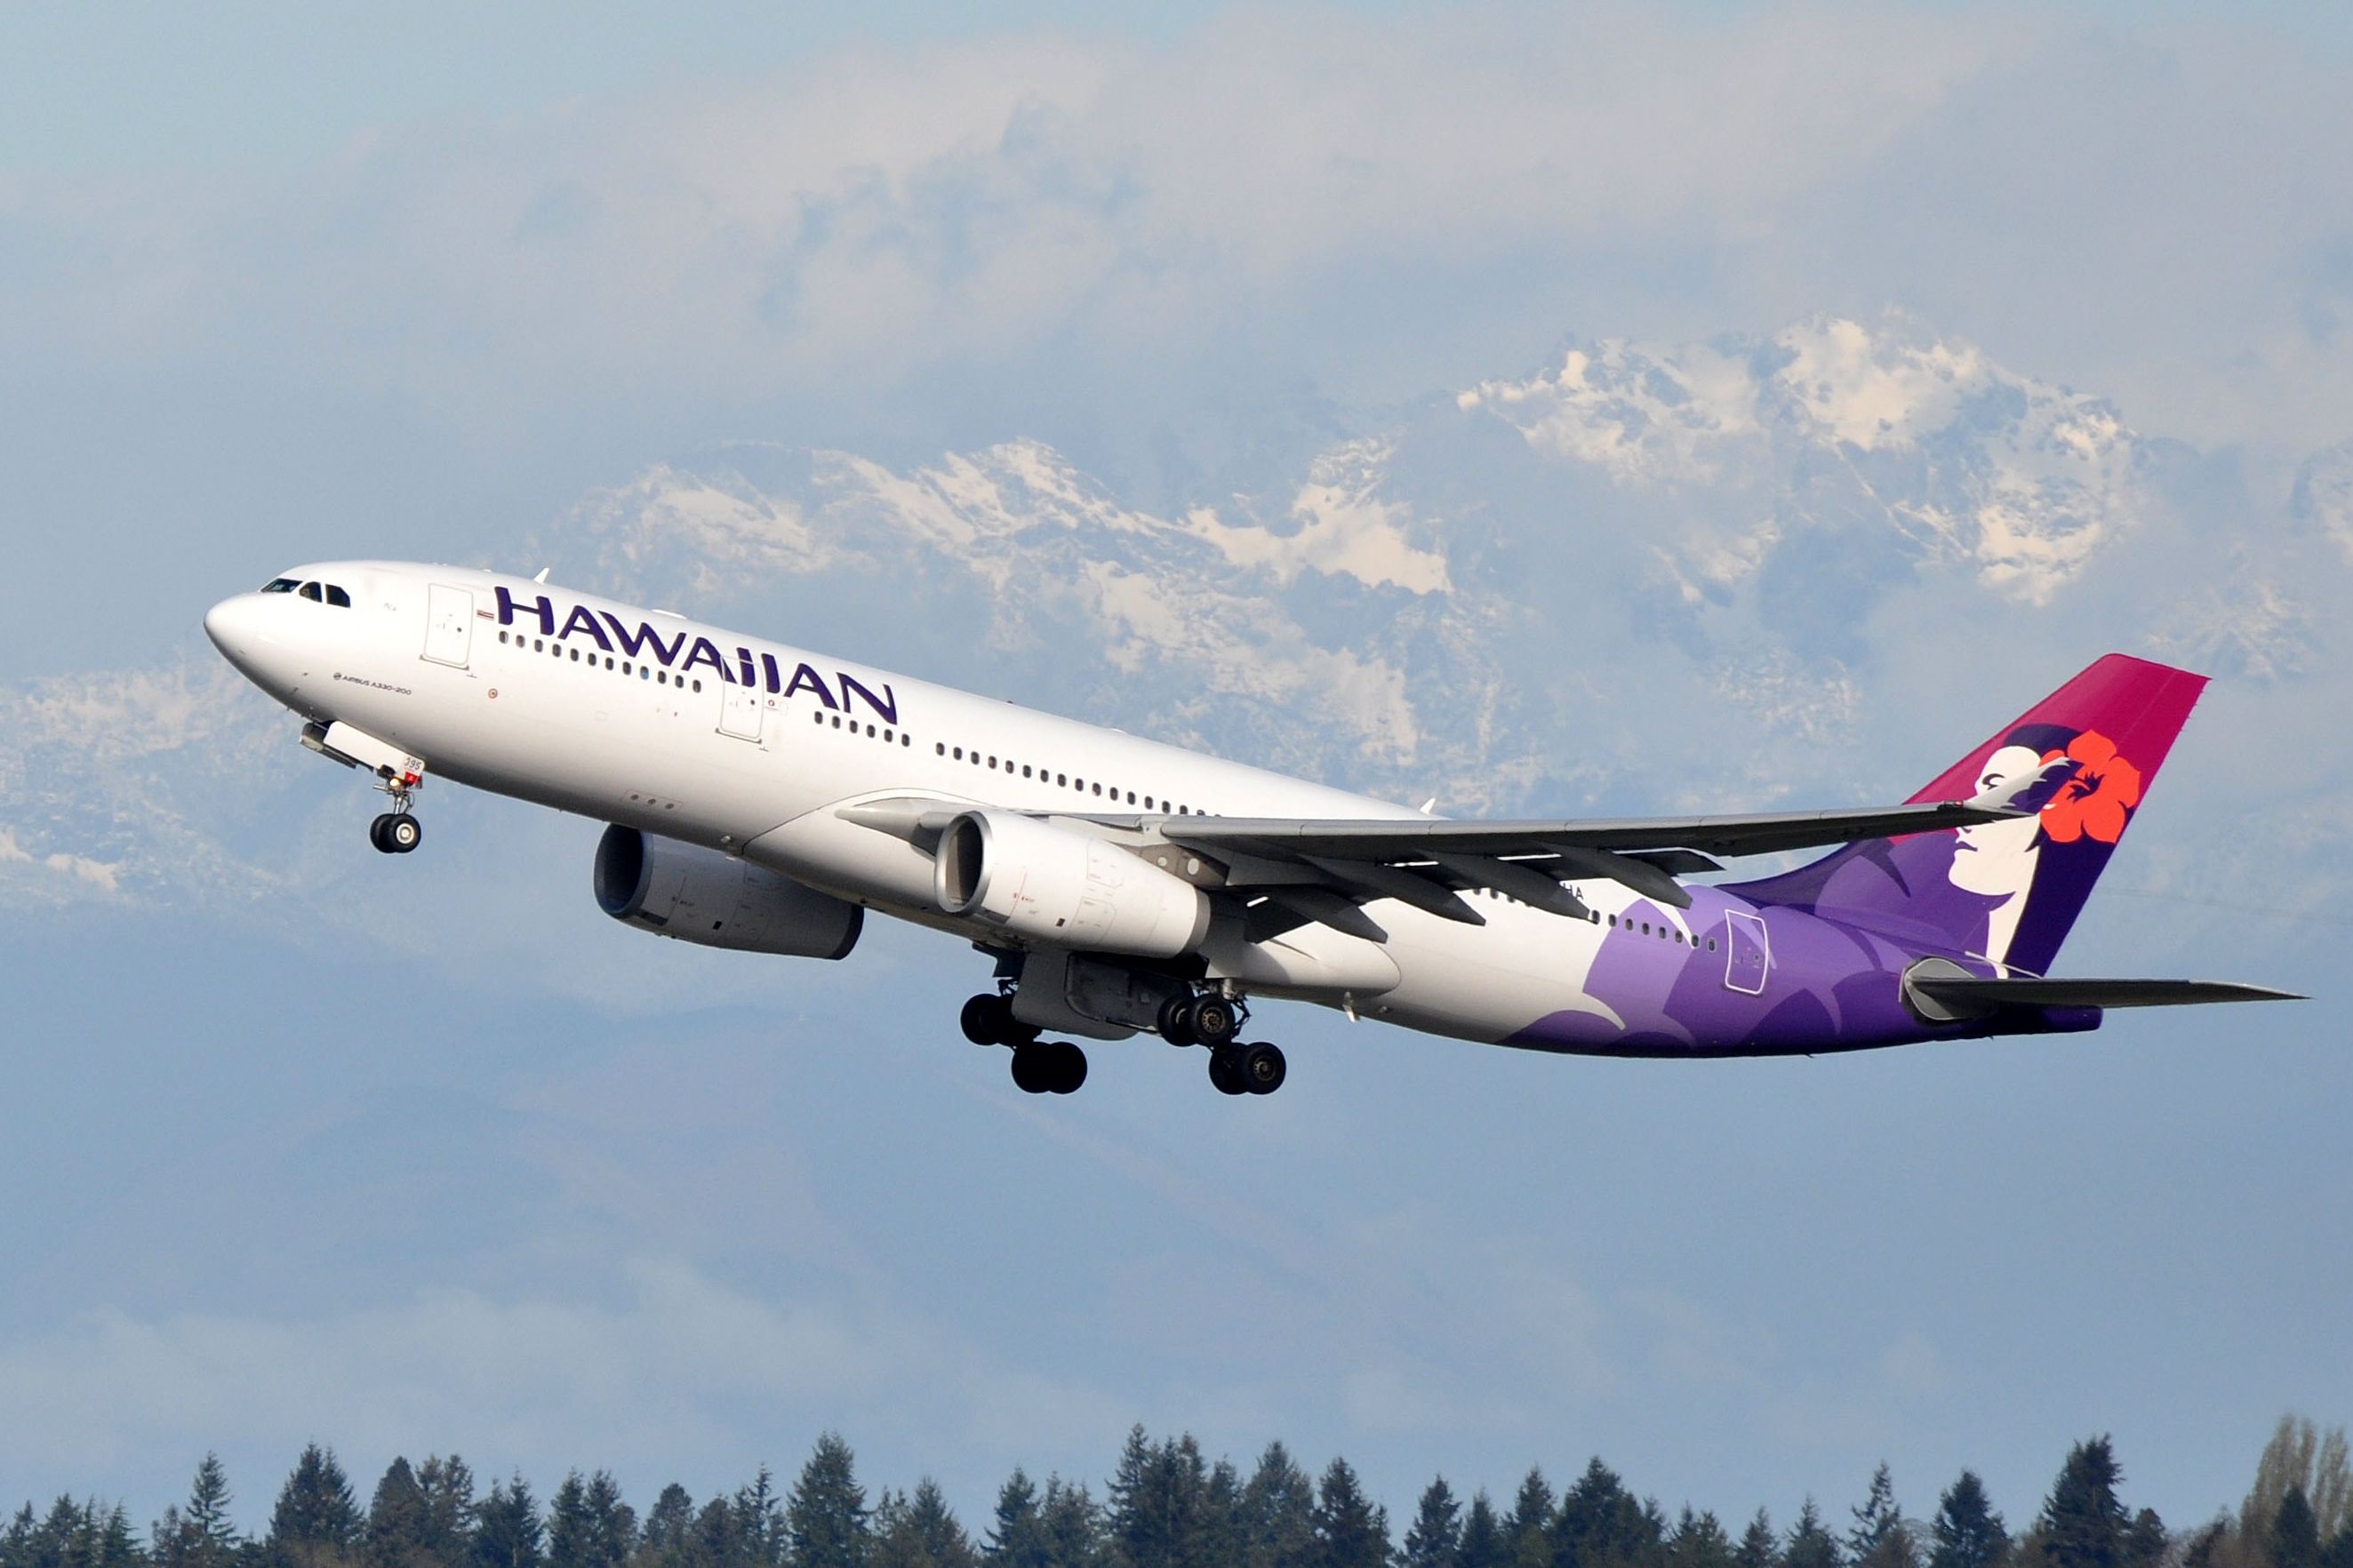 A Hawaiian Airlines plane taking off